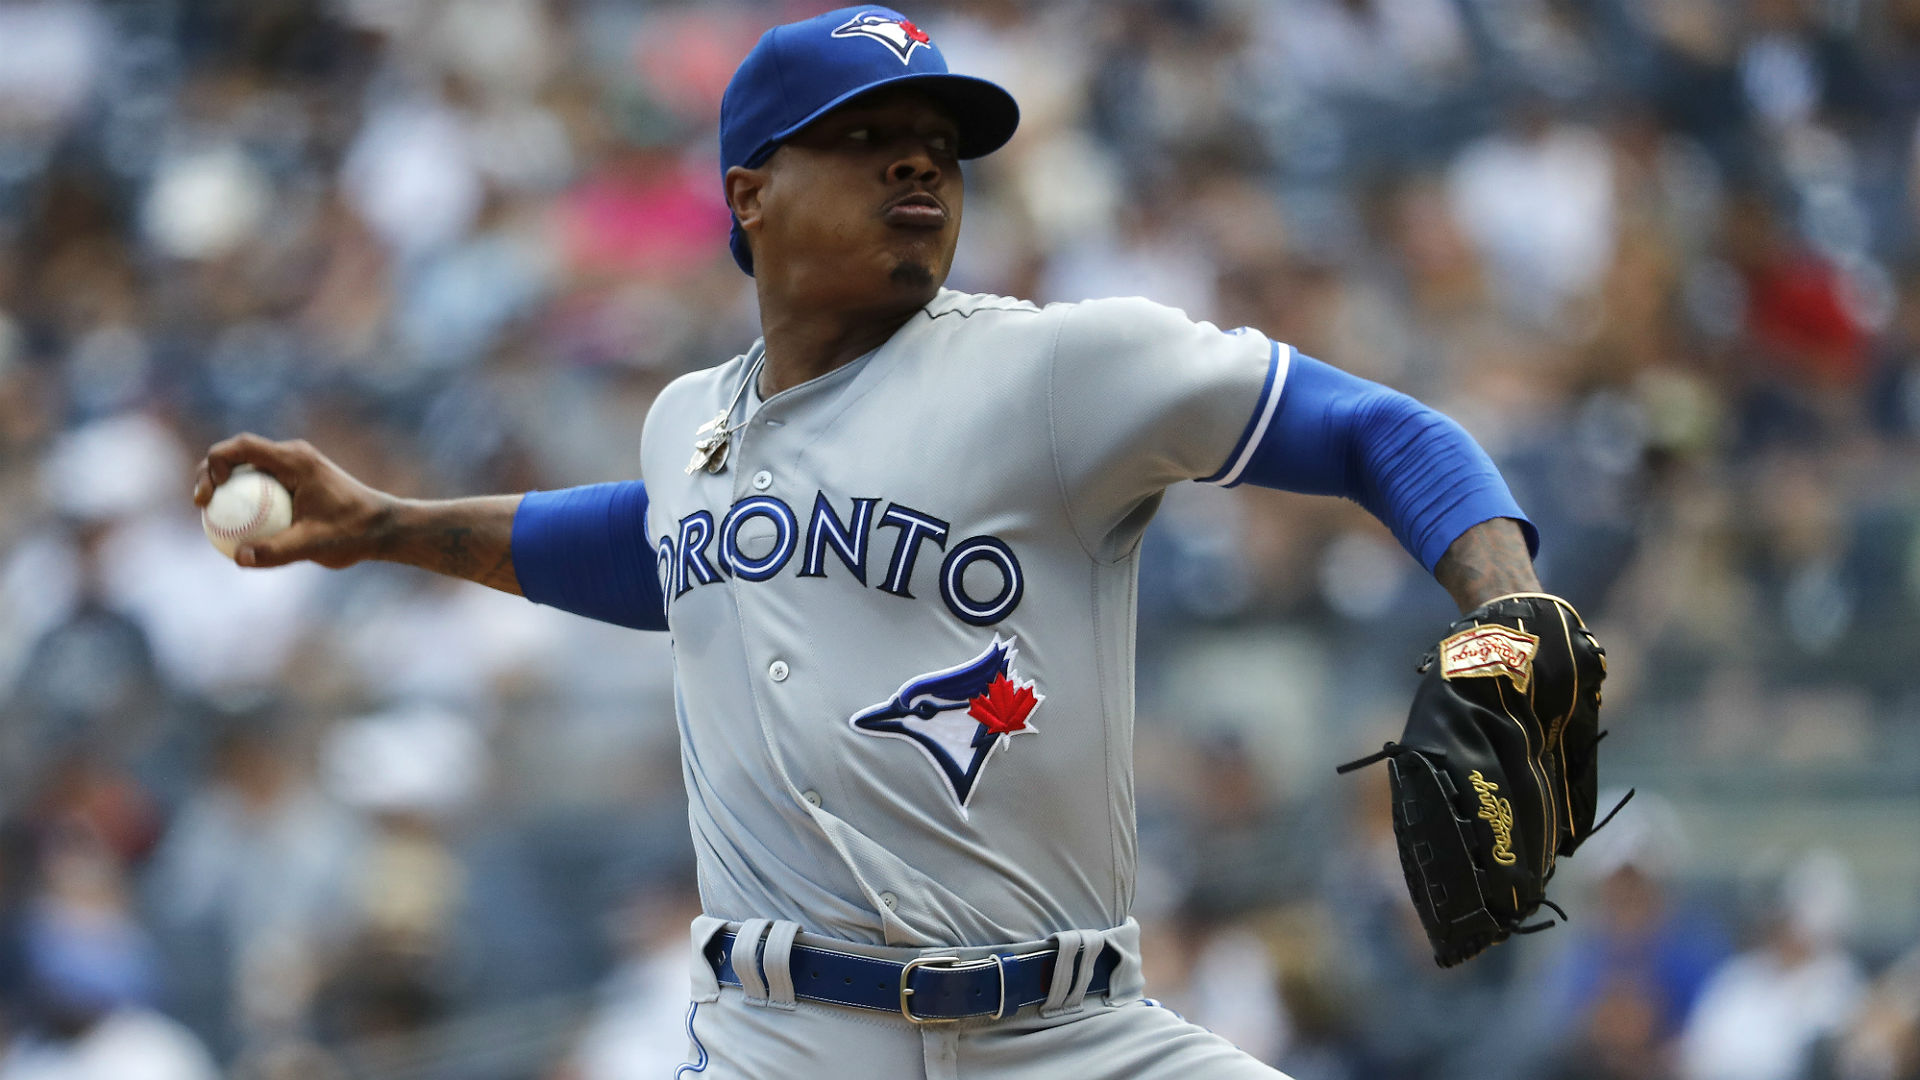 “I’m truly focused on pitching for the Toronto Blue Jays,” Stroman said. “Whatever happens, happens as far as outside of that."